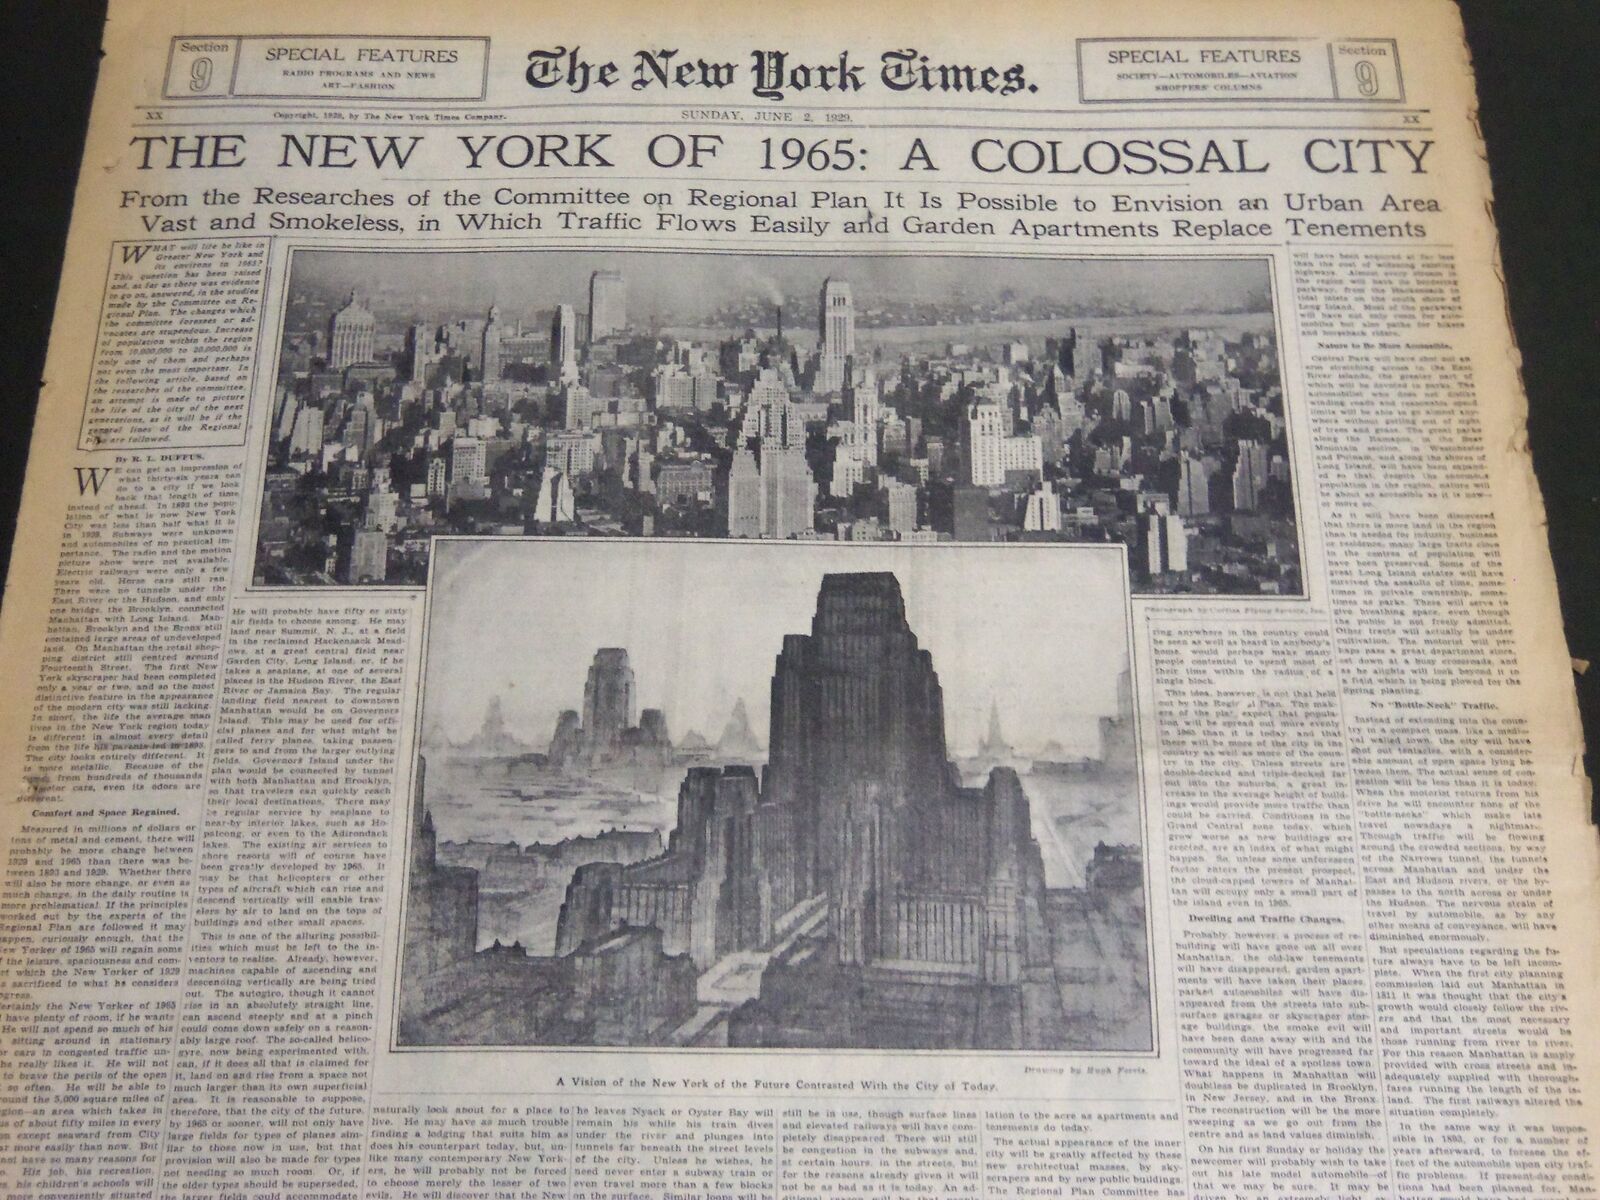 1929 JUNE 2 NY TIMES SECTION - NEW YORK OF 1965 - A COLOSSAR CITY - NT 7082